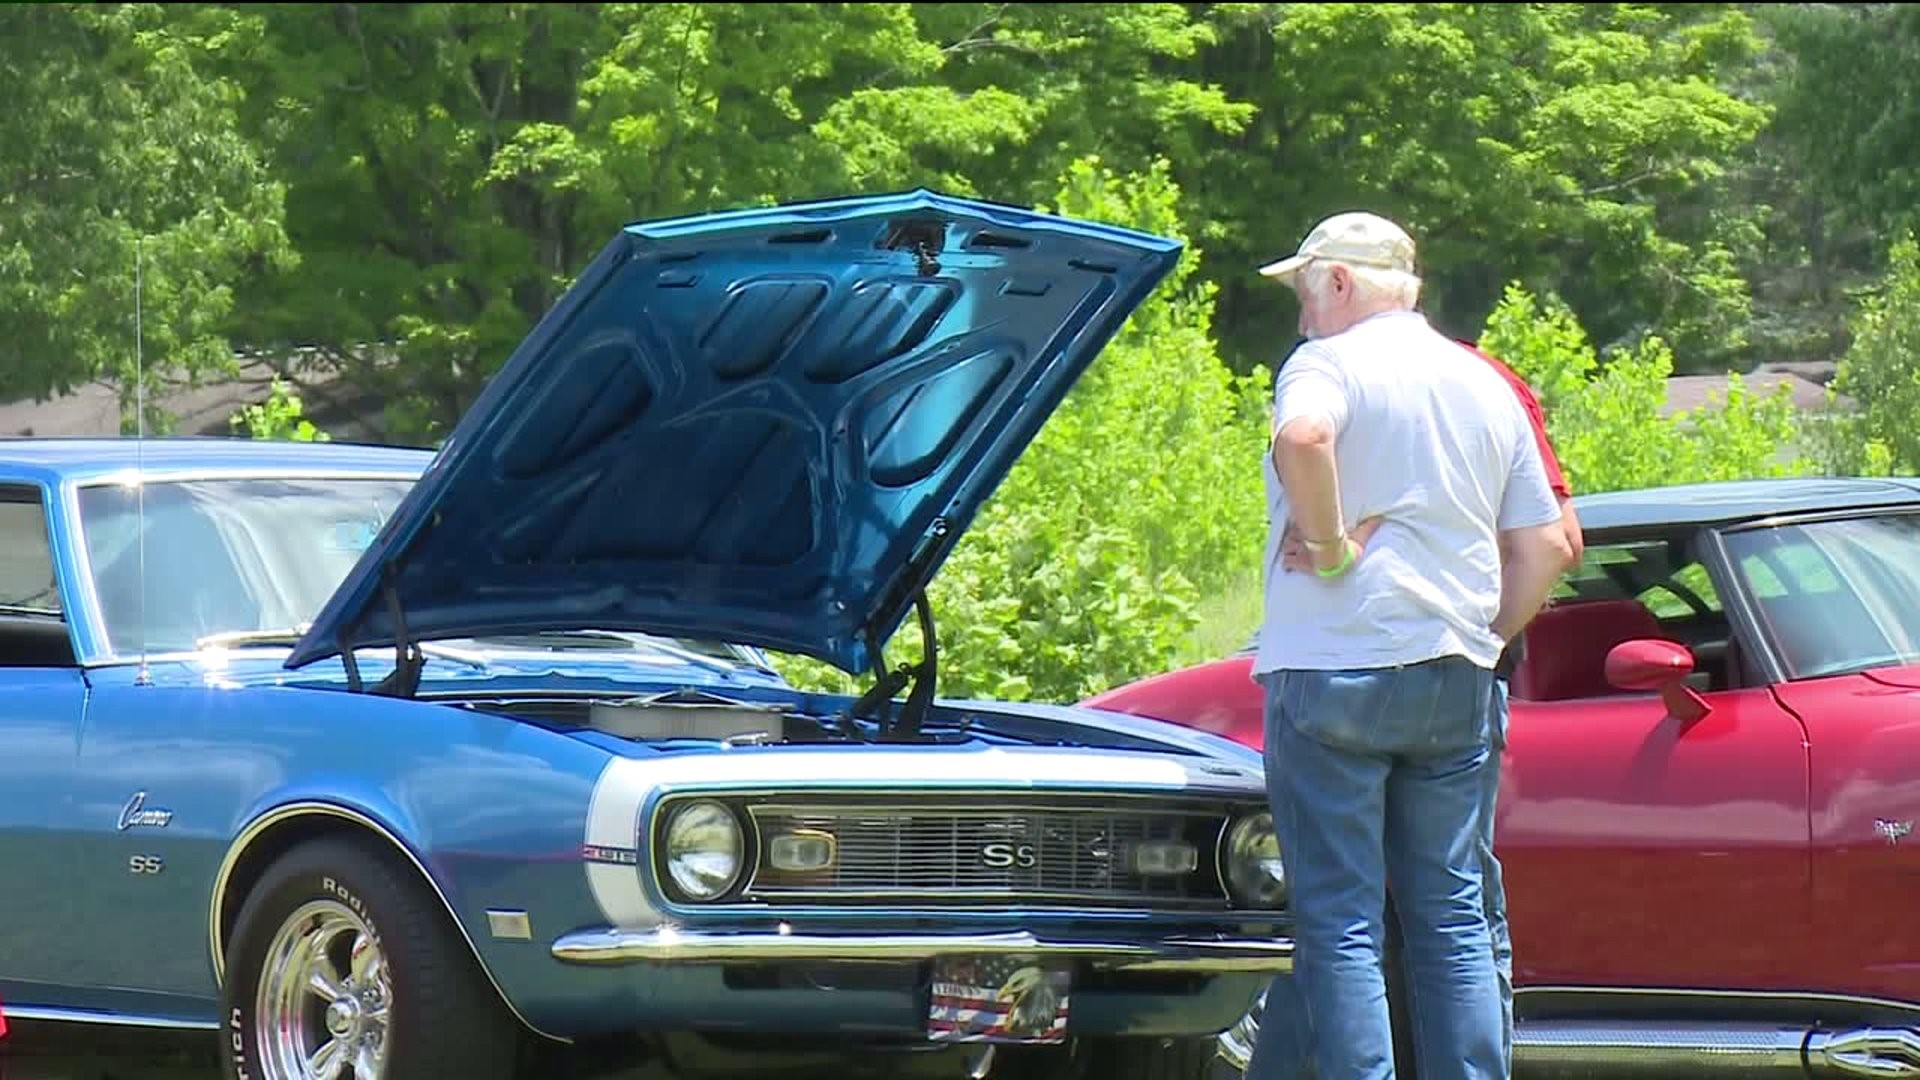 Sixth Annual Antique Car Show in Monroe County